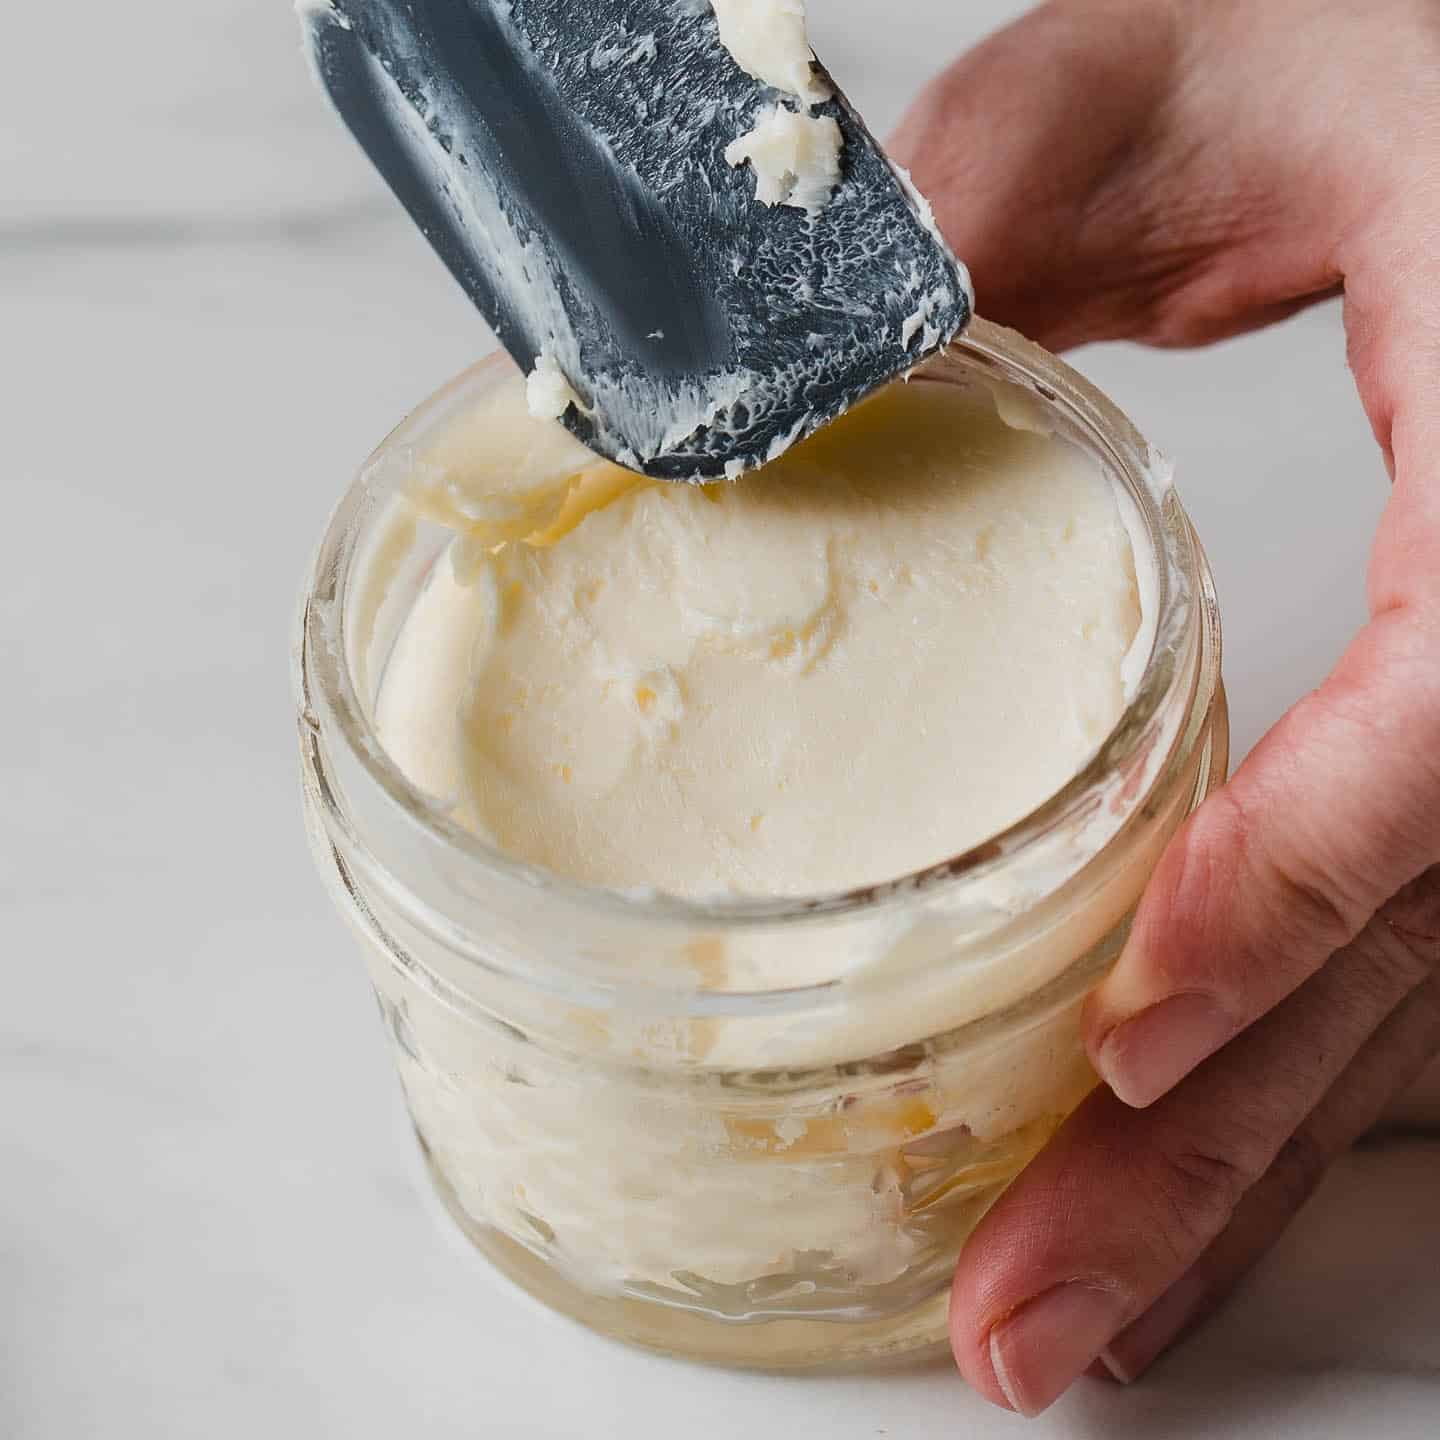 Homemade butter in a small glass jar.